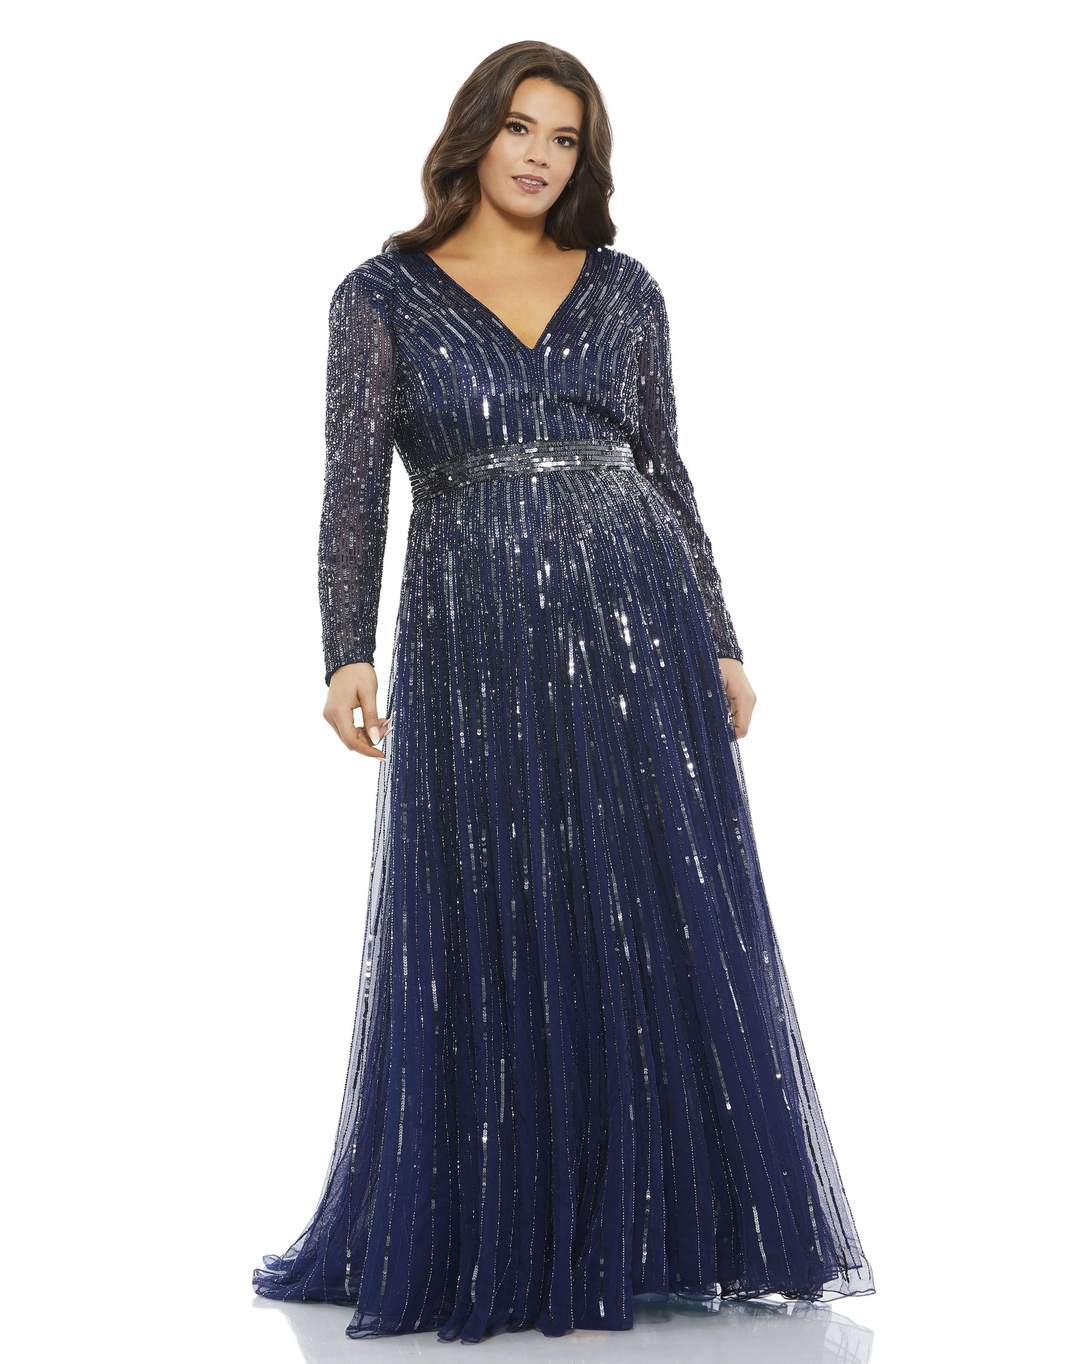 Enjoy your wow-worthy moment at weddings, galas or award ceremonies in this flawless A-line gown. Stripes of shimmering sequins and beads light up the gown beautifully fashioned with a modern V-neckline, see-through long sleeves, and a dreamy flared skirt